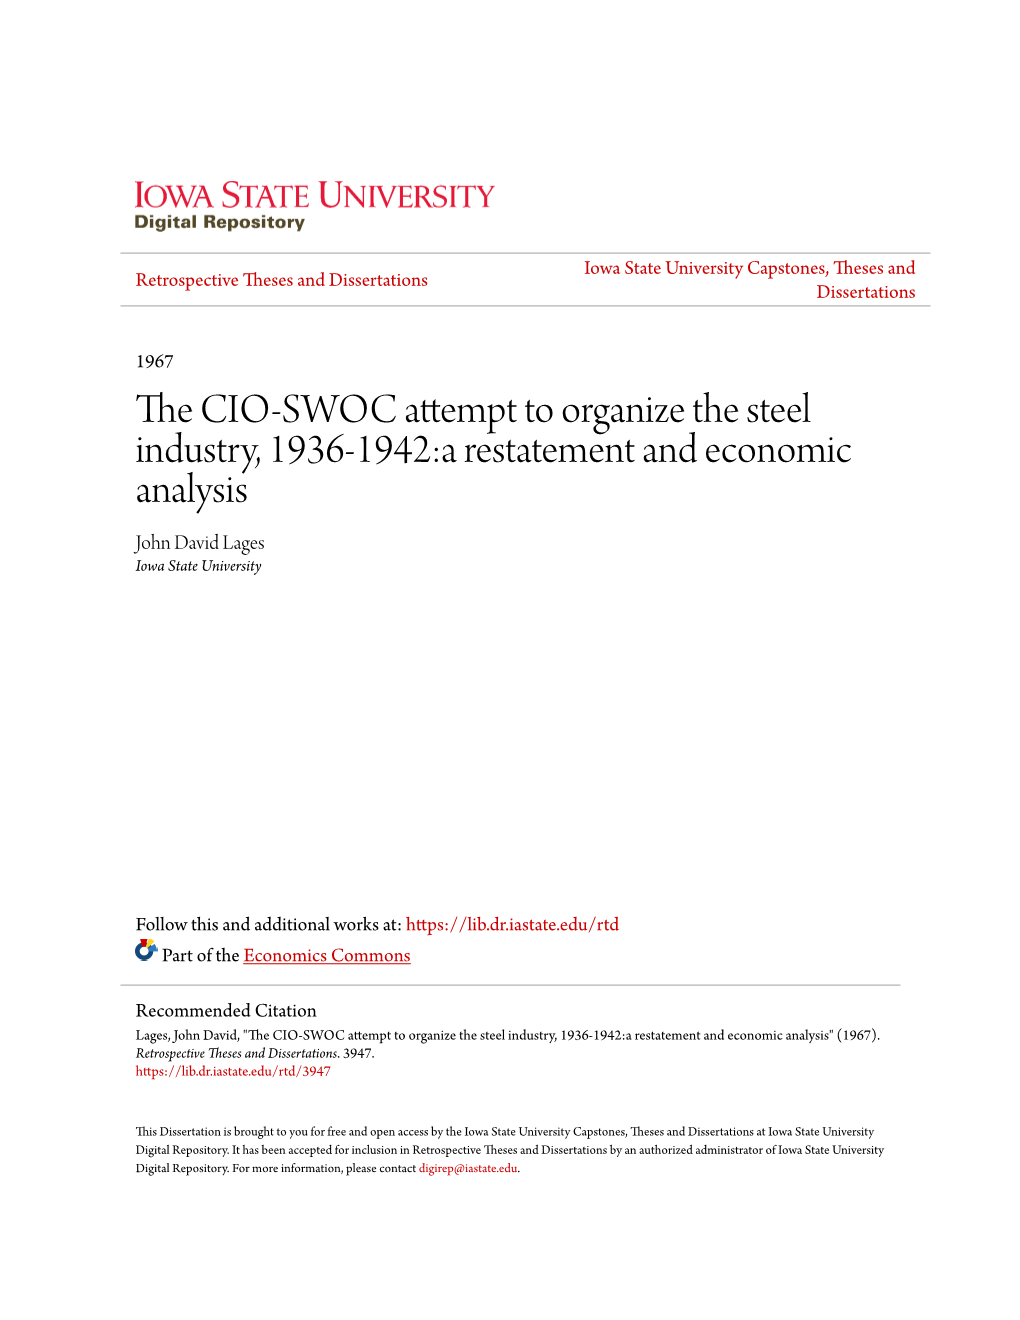 The CIO-SWOC Attempt to Organize the Steel Industry, 1936-1942:A